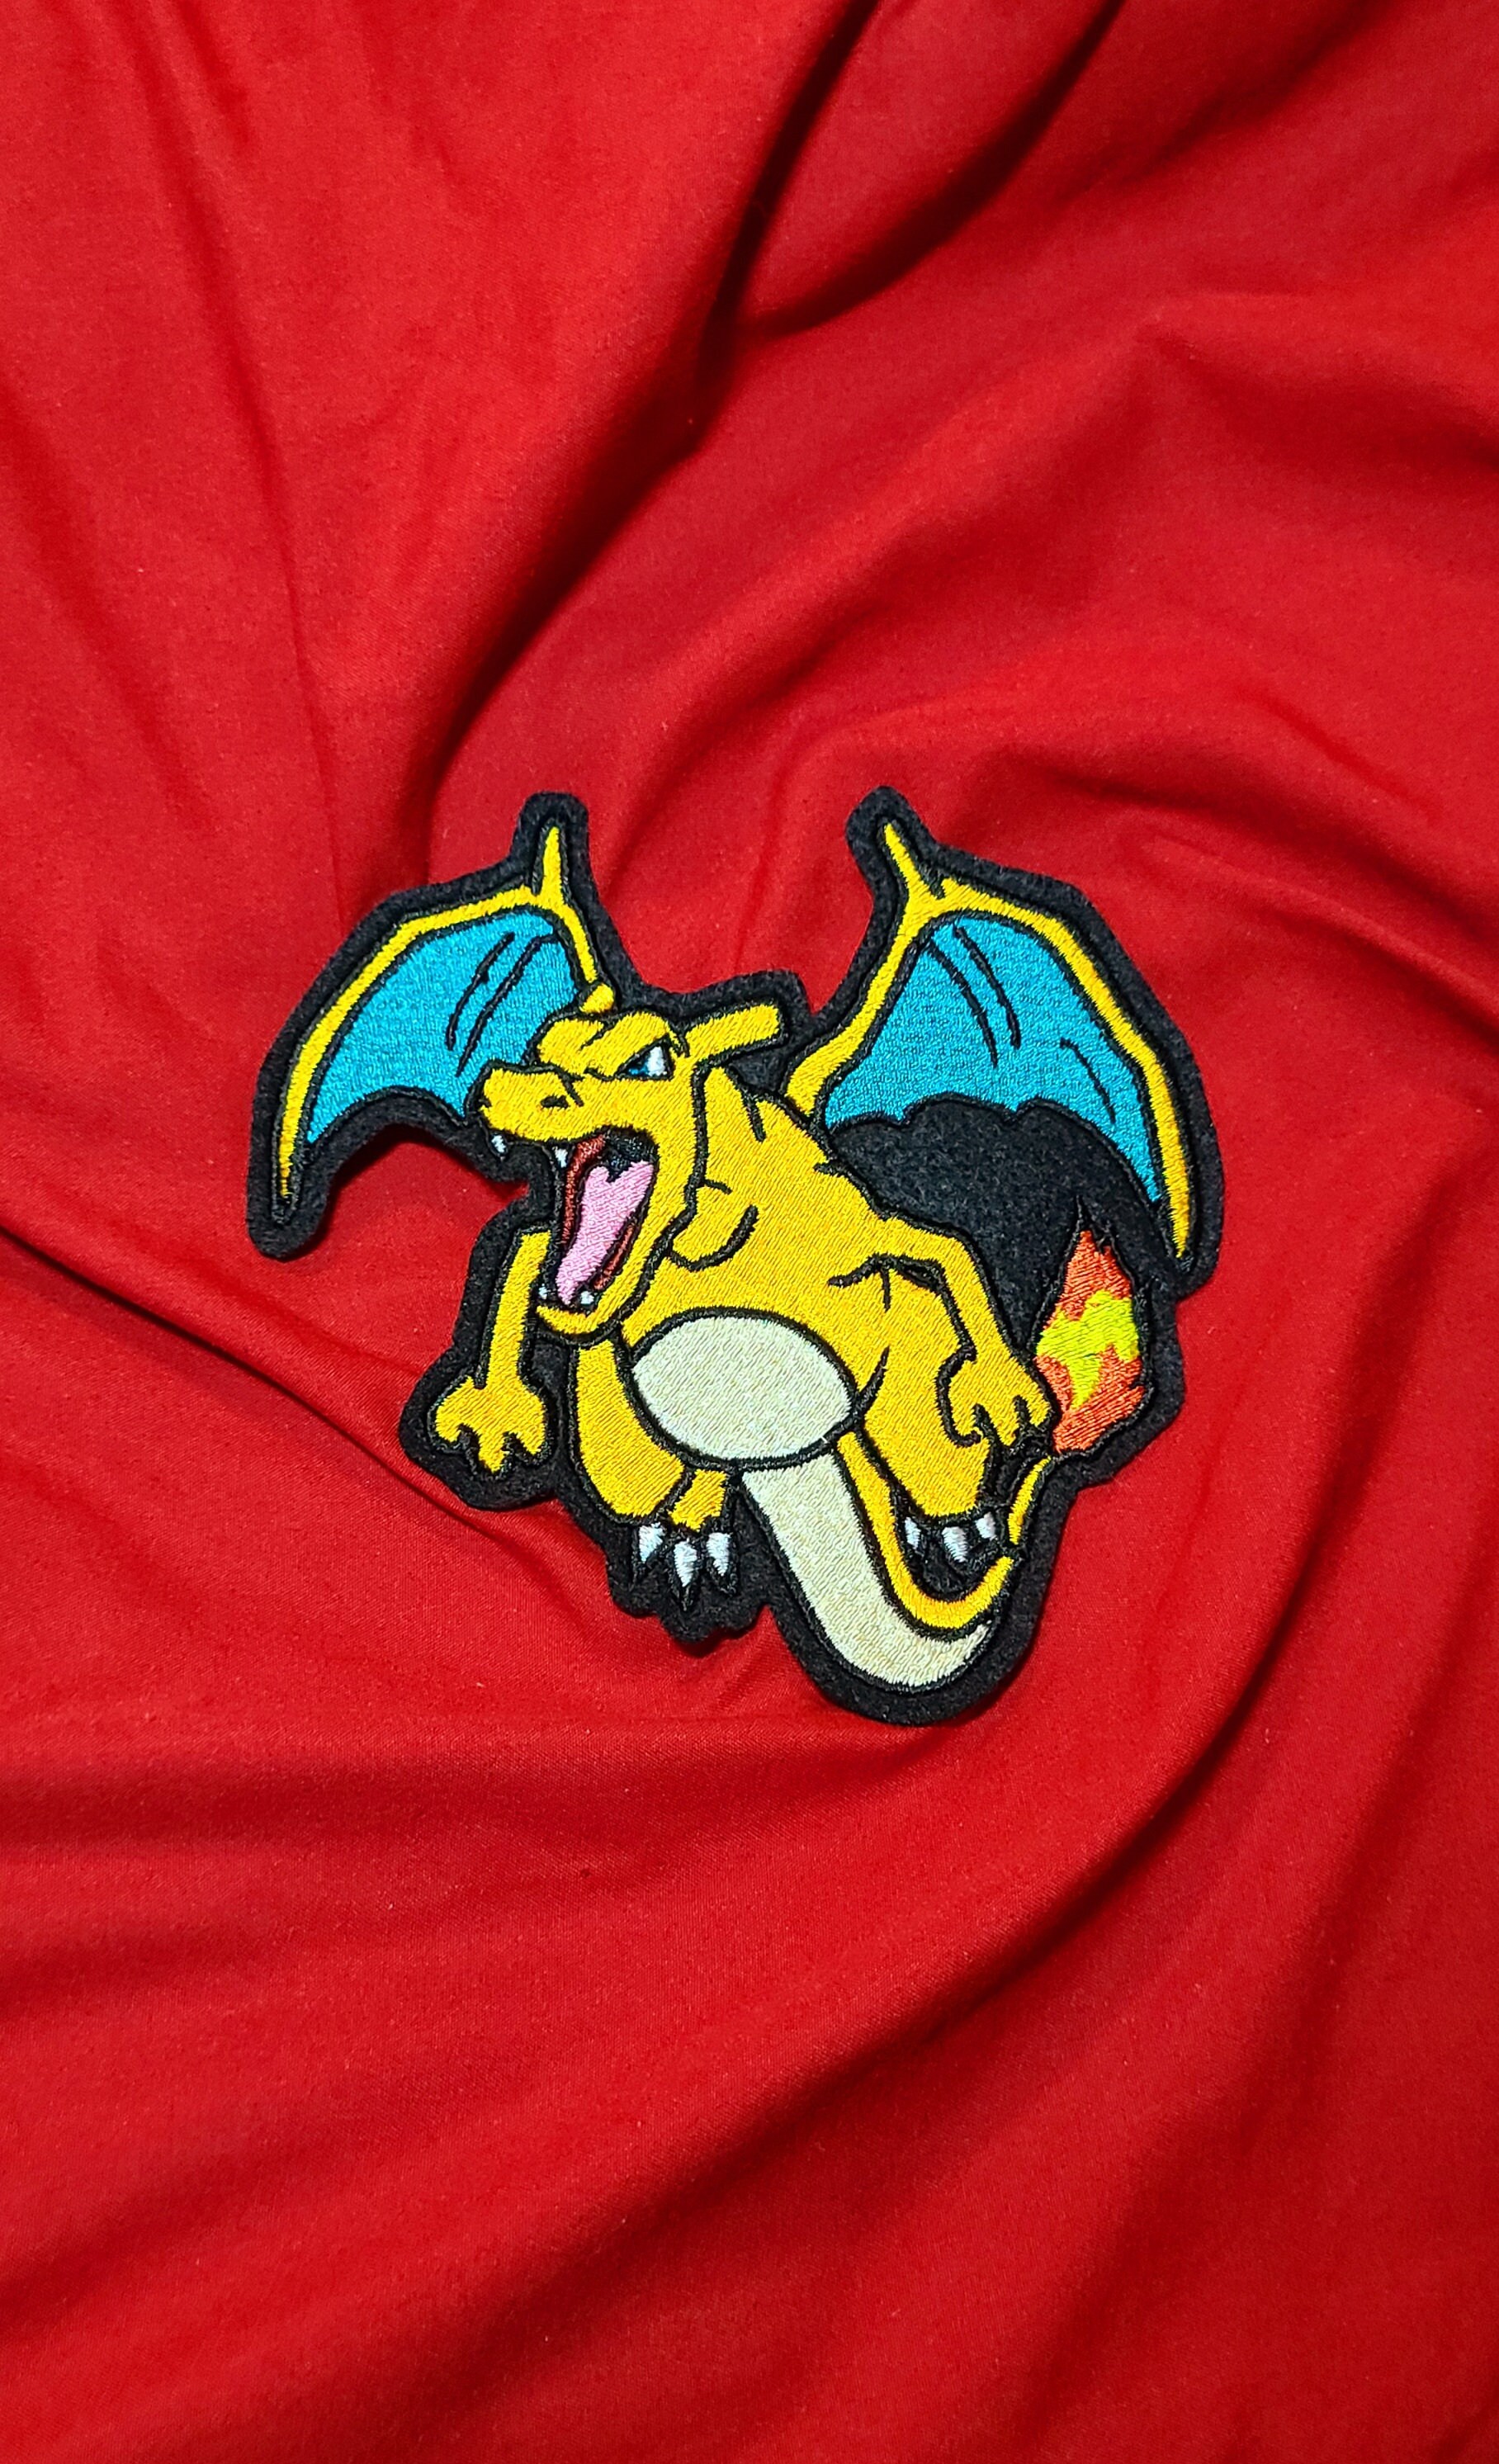 Shiny Mega Charizard Y - Iron on patch - Metallic Embroidered. Pokemon  patch.